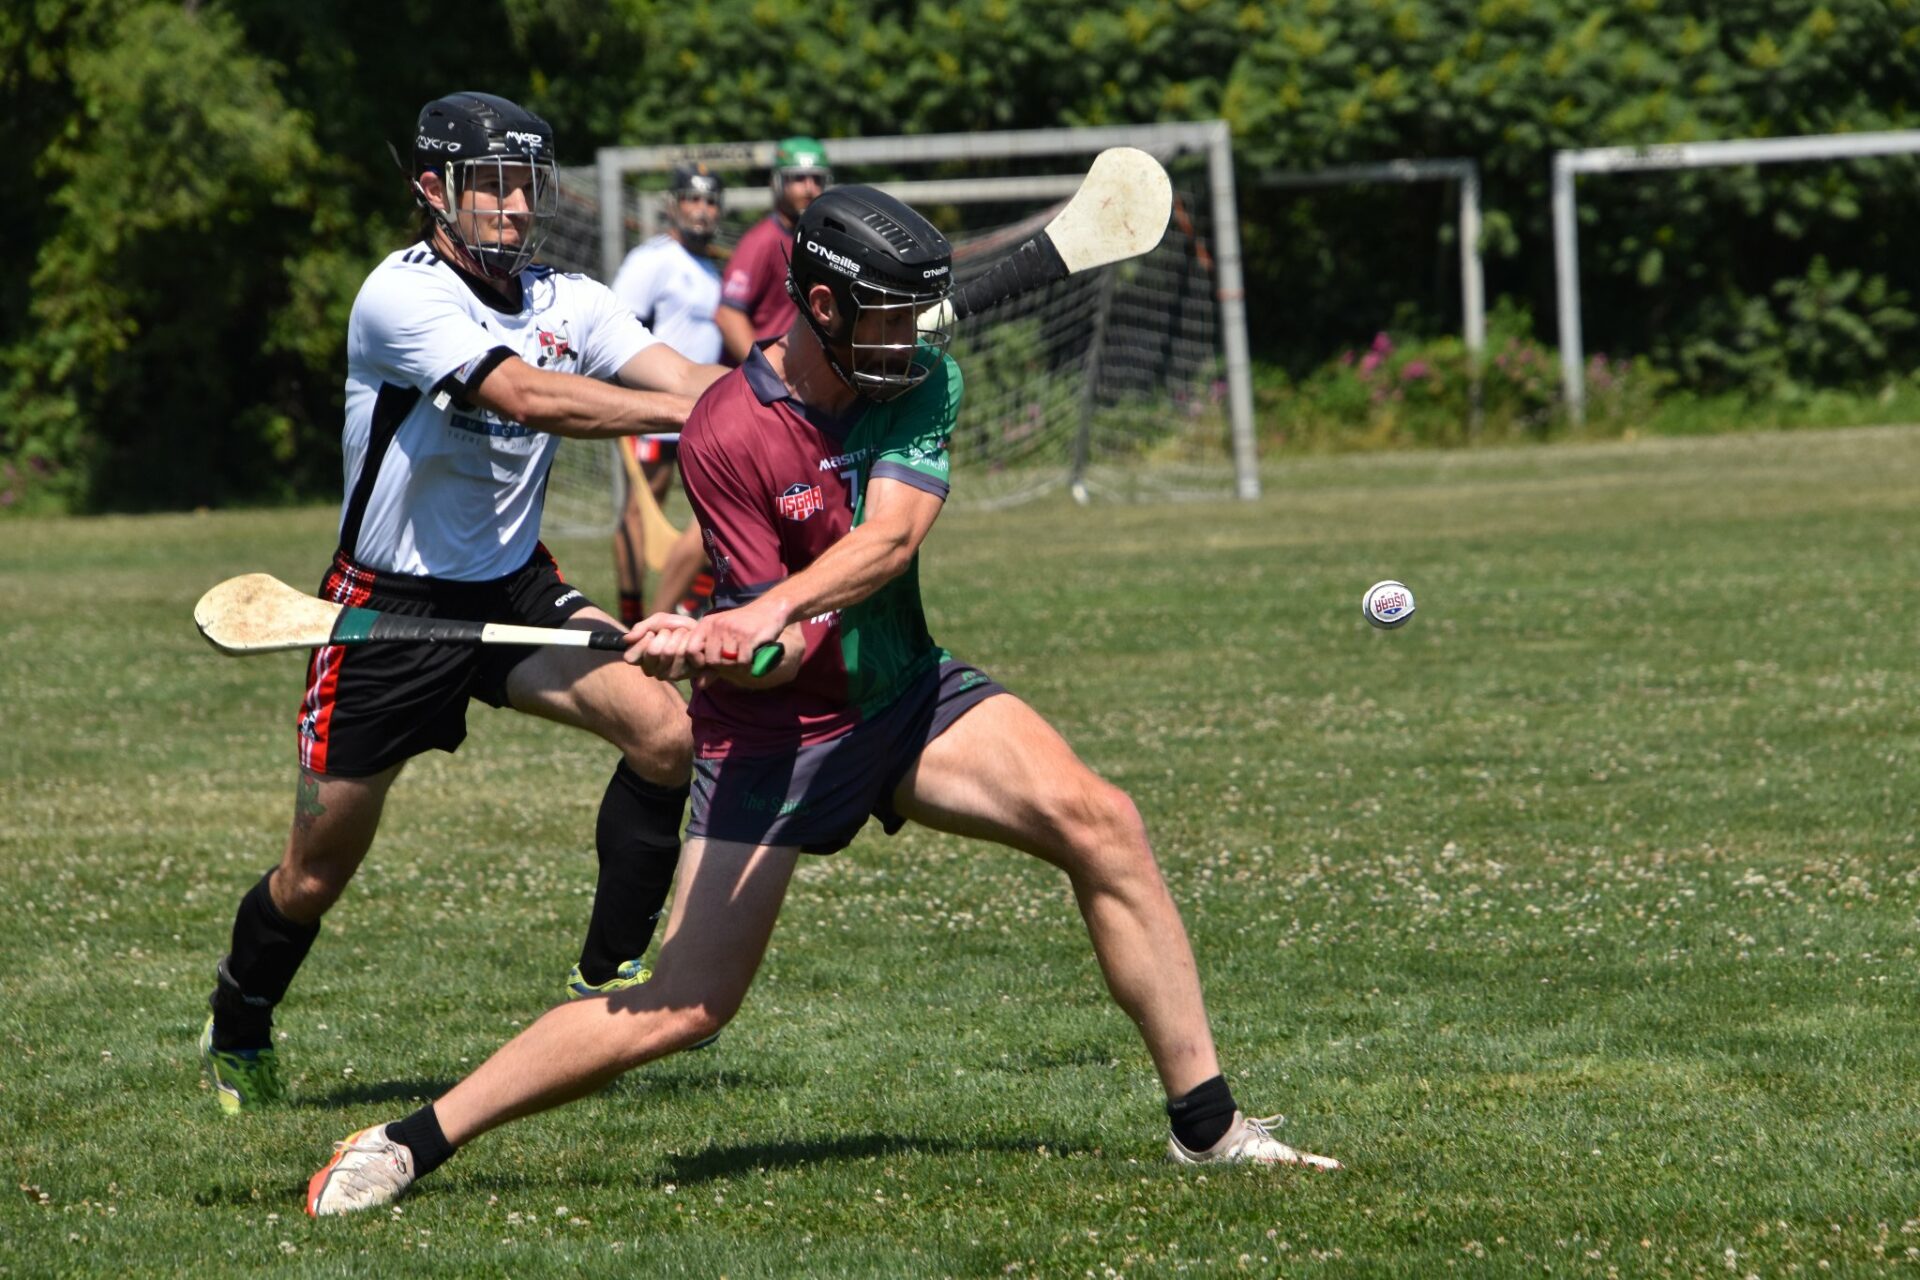 Cleveland Hurling Midwest Championship Weekend